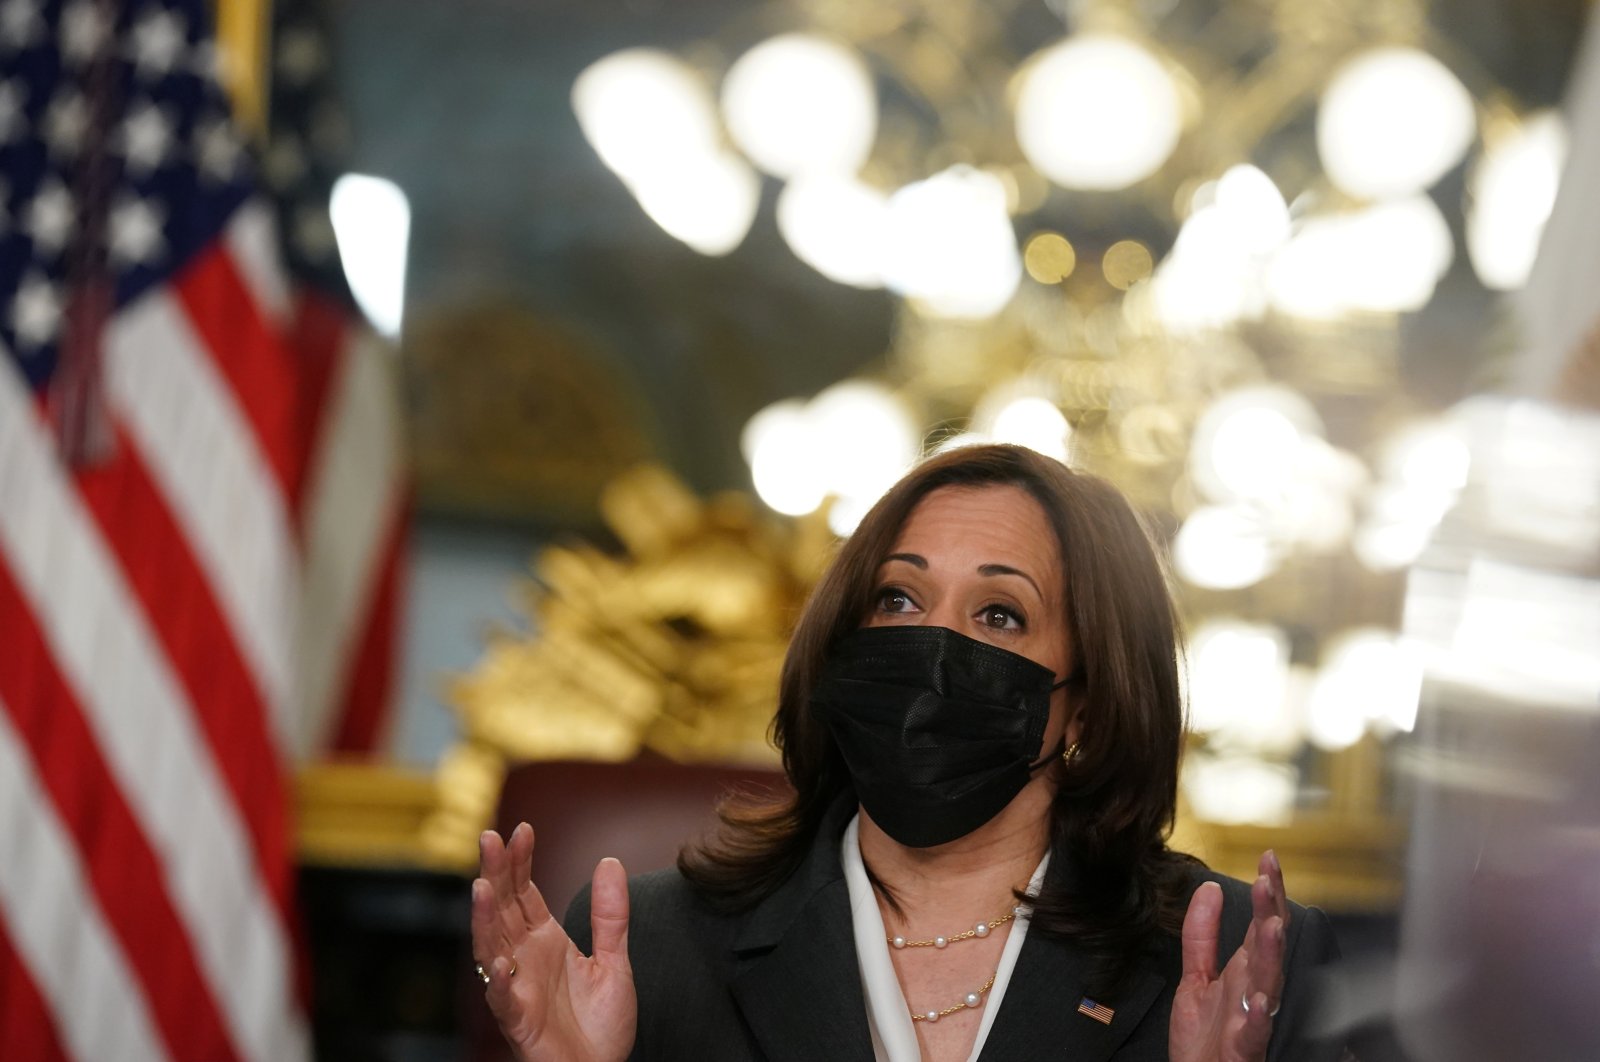 U.S. Vice President Kamala Harris holds a conversation with heads of foundations to discuss Northern Triangle countries of Central America and the surge of migrants to the southern border, at the White House in Washington, U.S., April 22, 2021. (Reuters Photo)